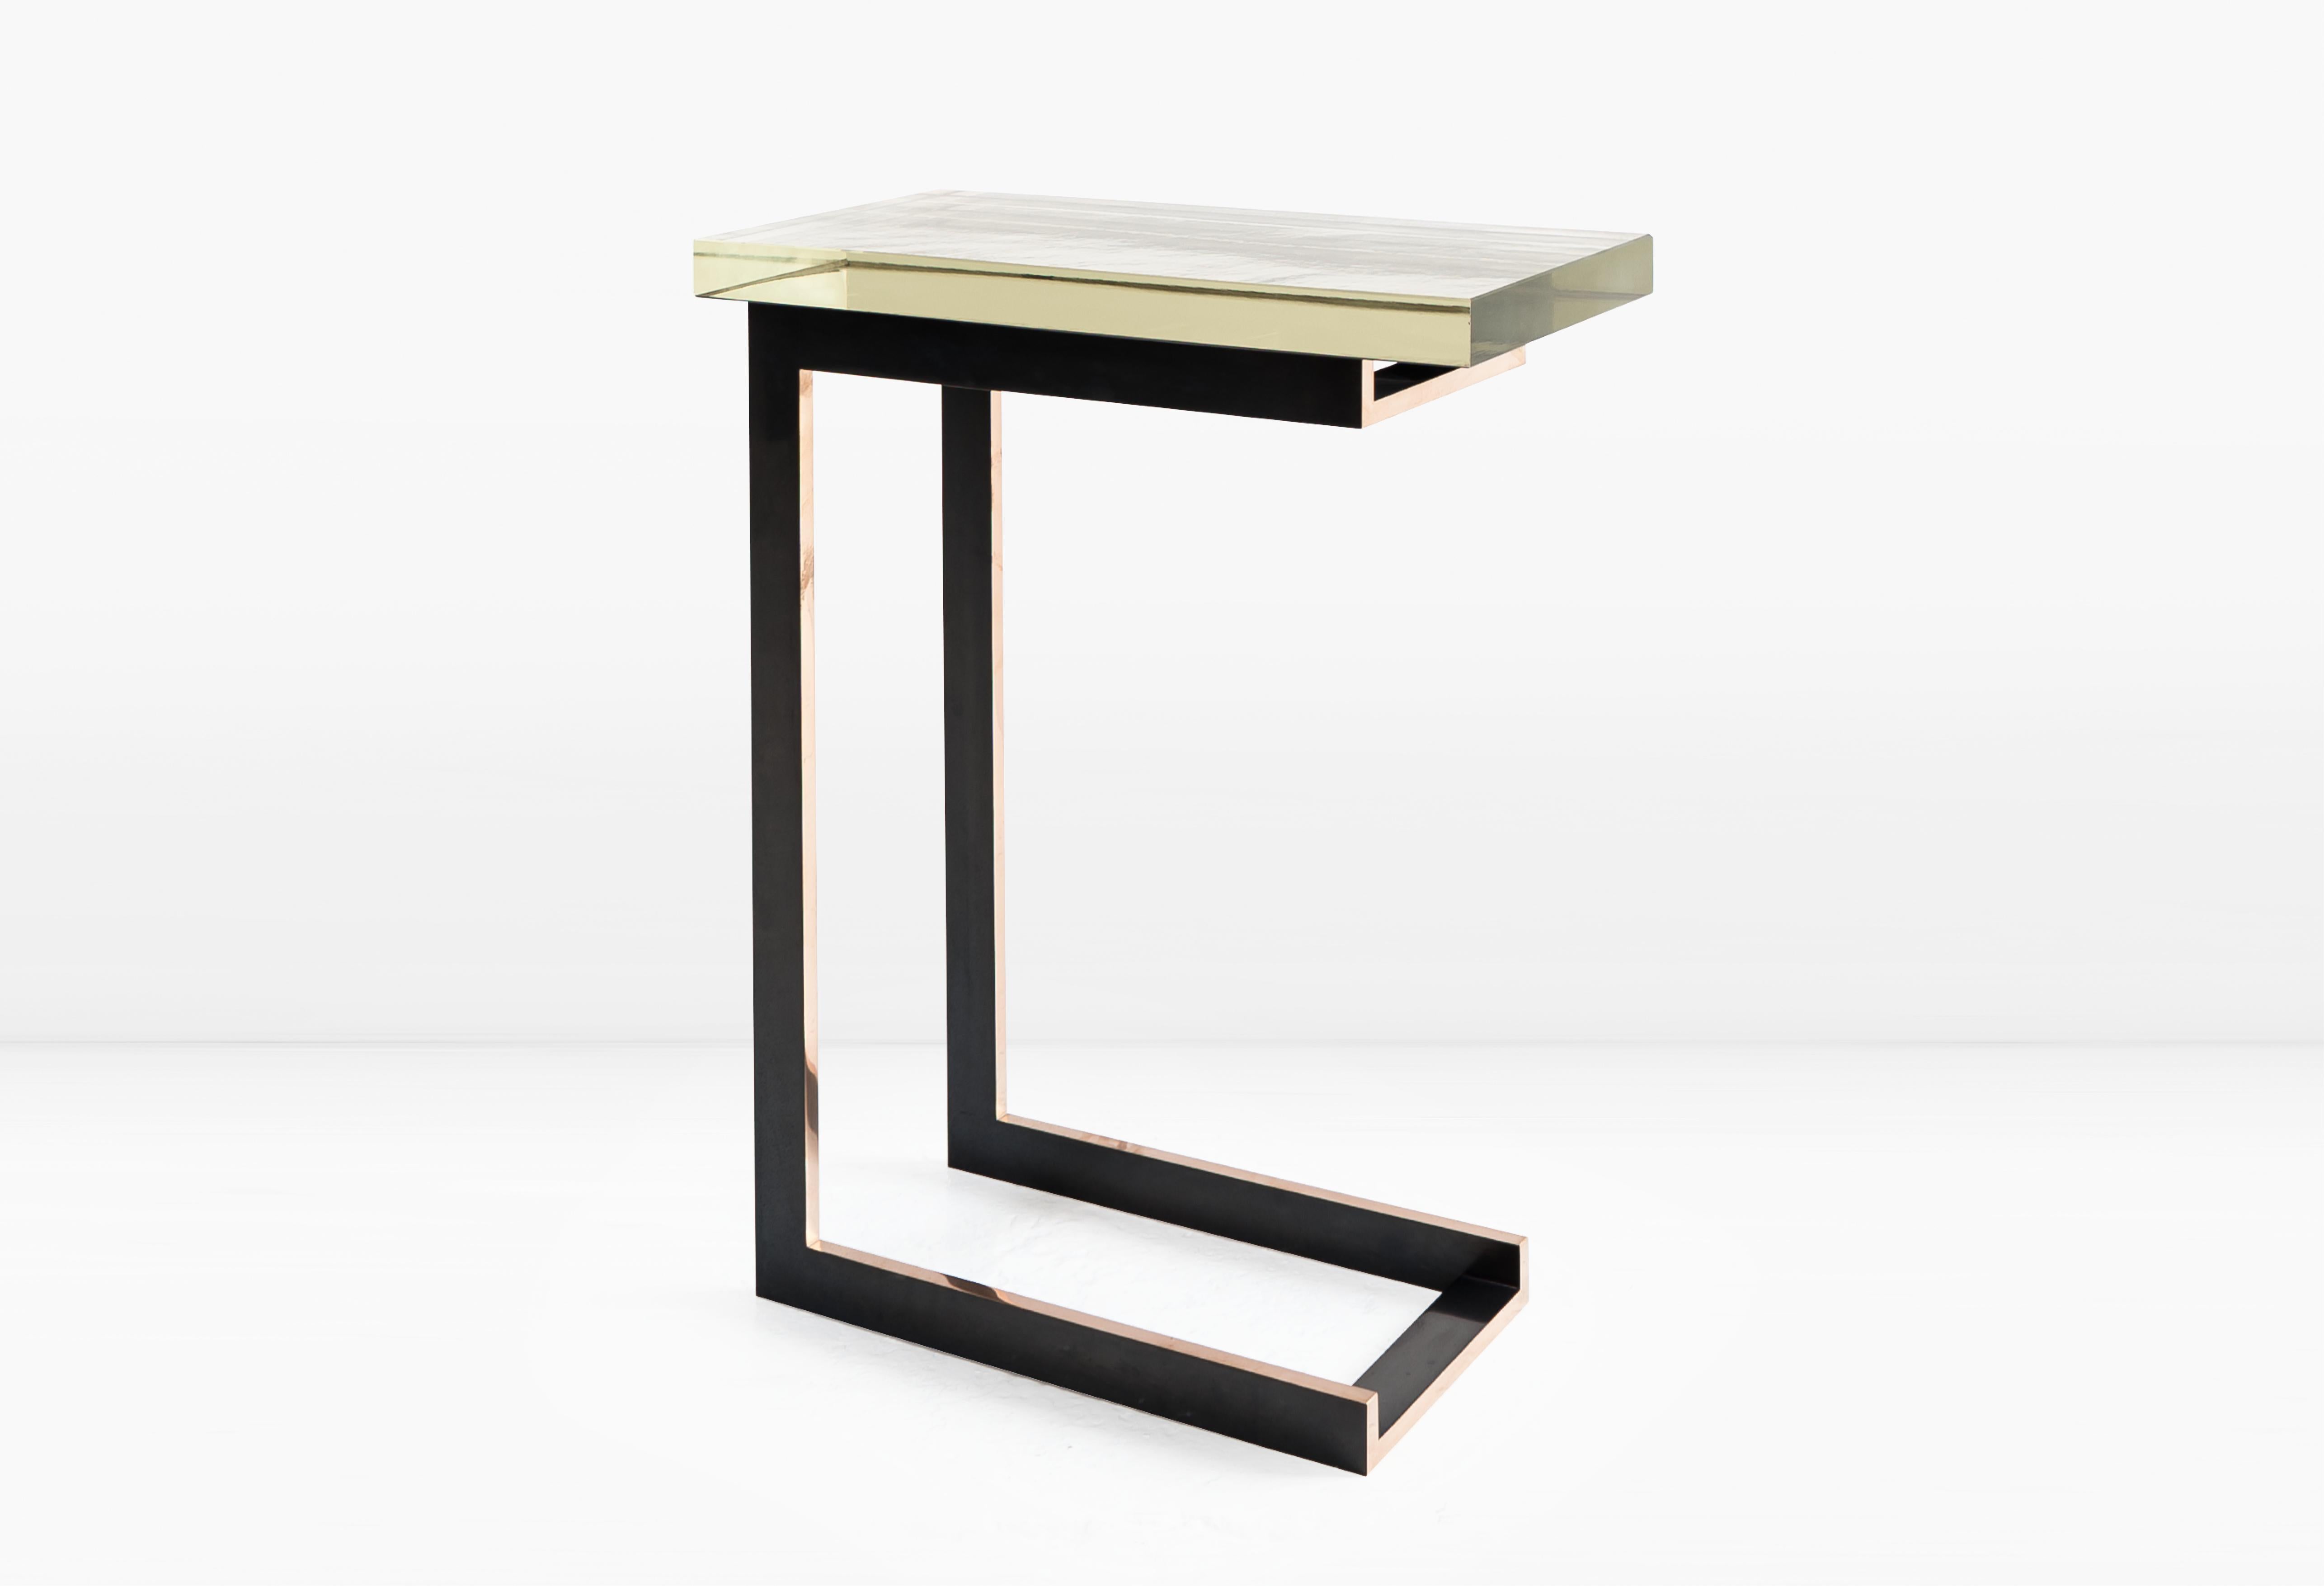 The Dempsey Side Table can easily assimilate into any room by virtue of both its elegant minimalism and its petite size. Shown with a 1 3/8